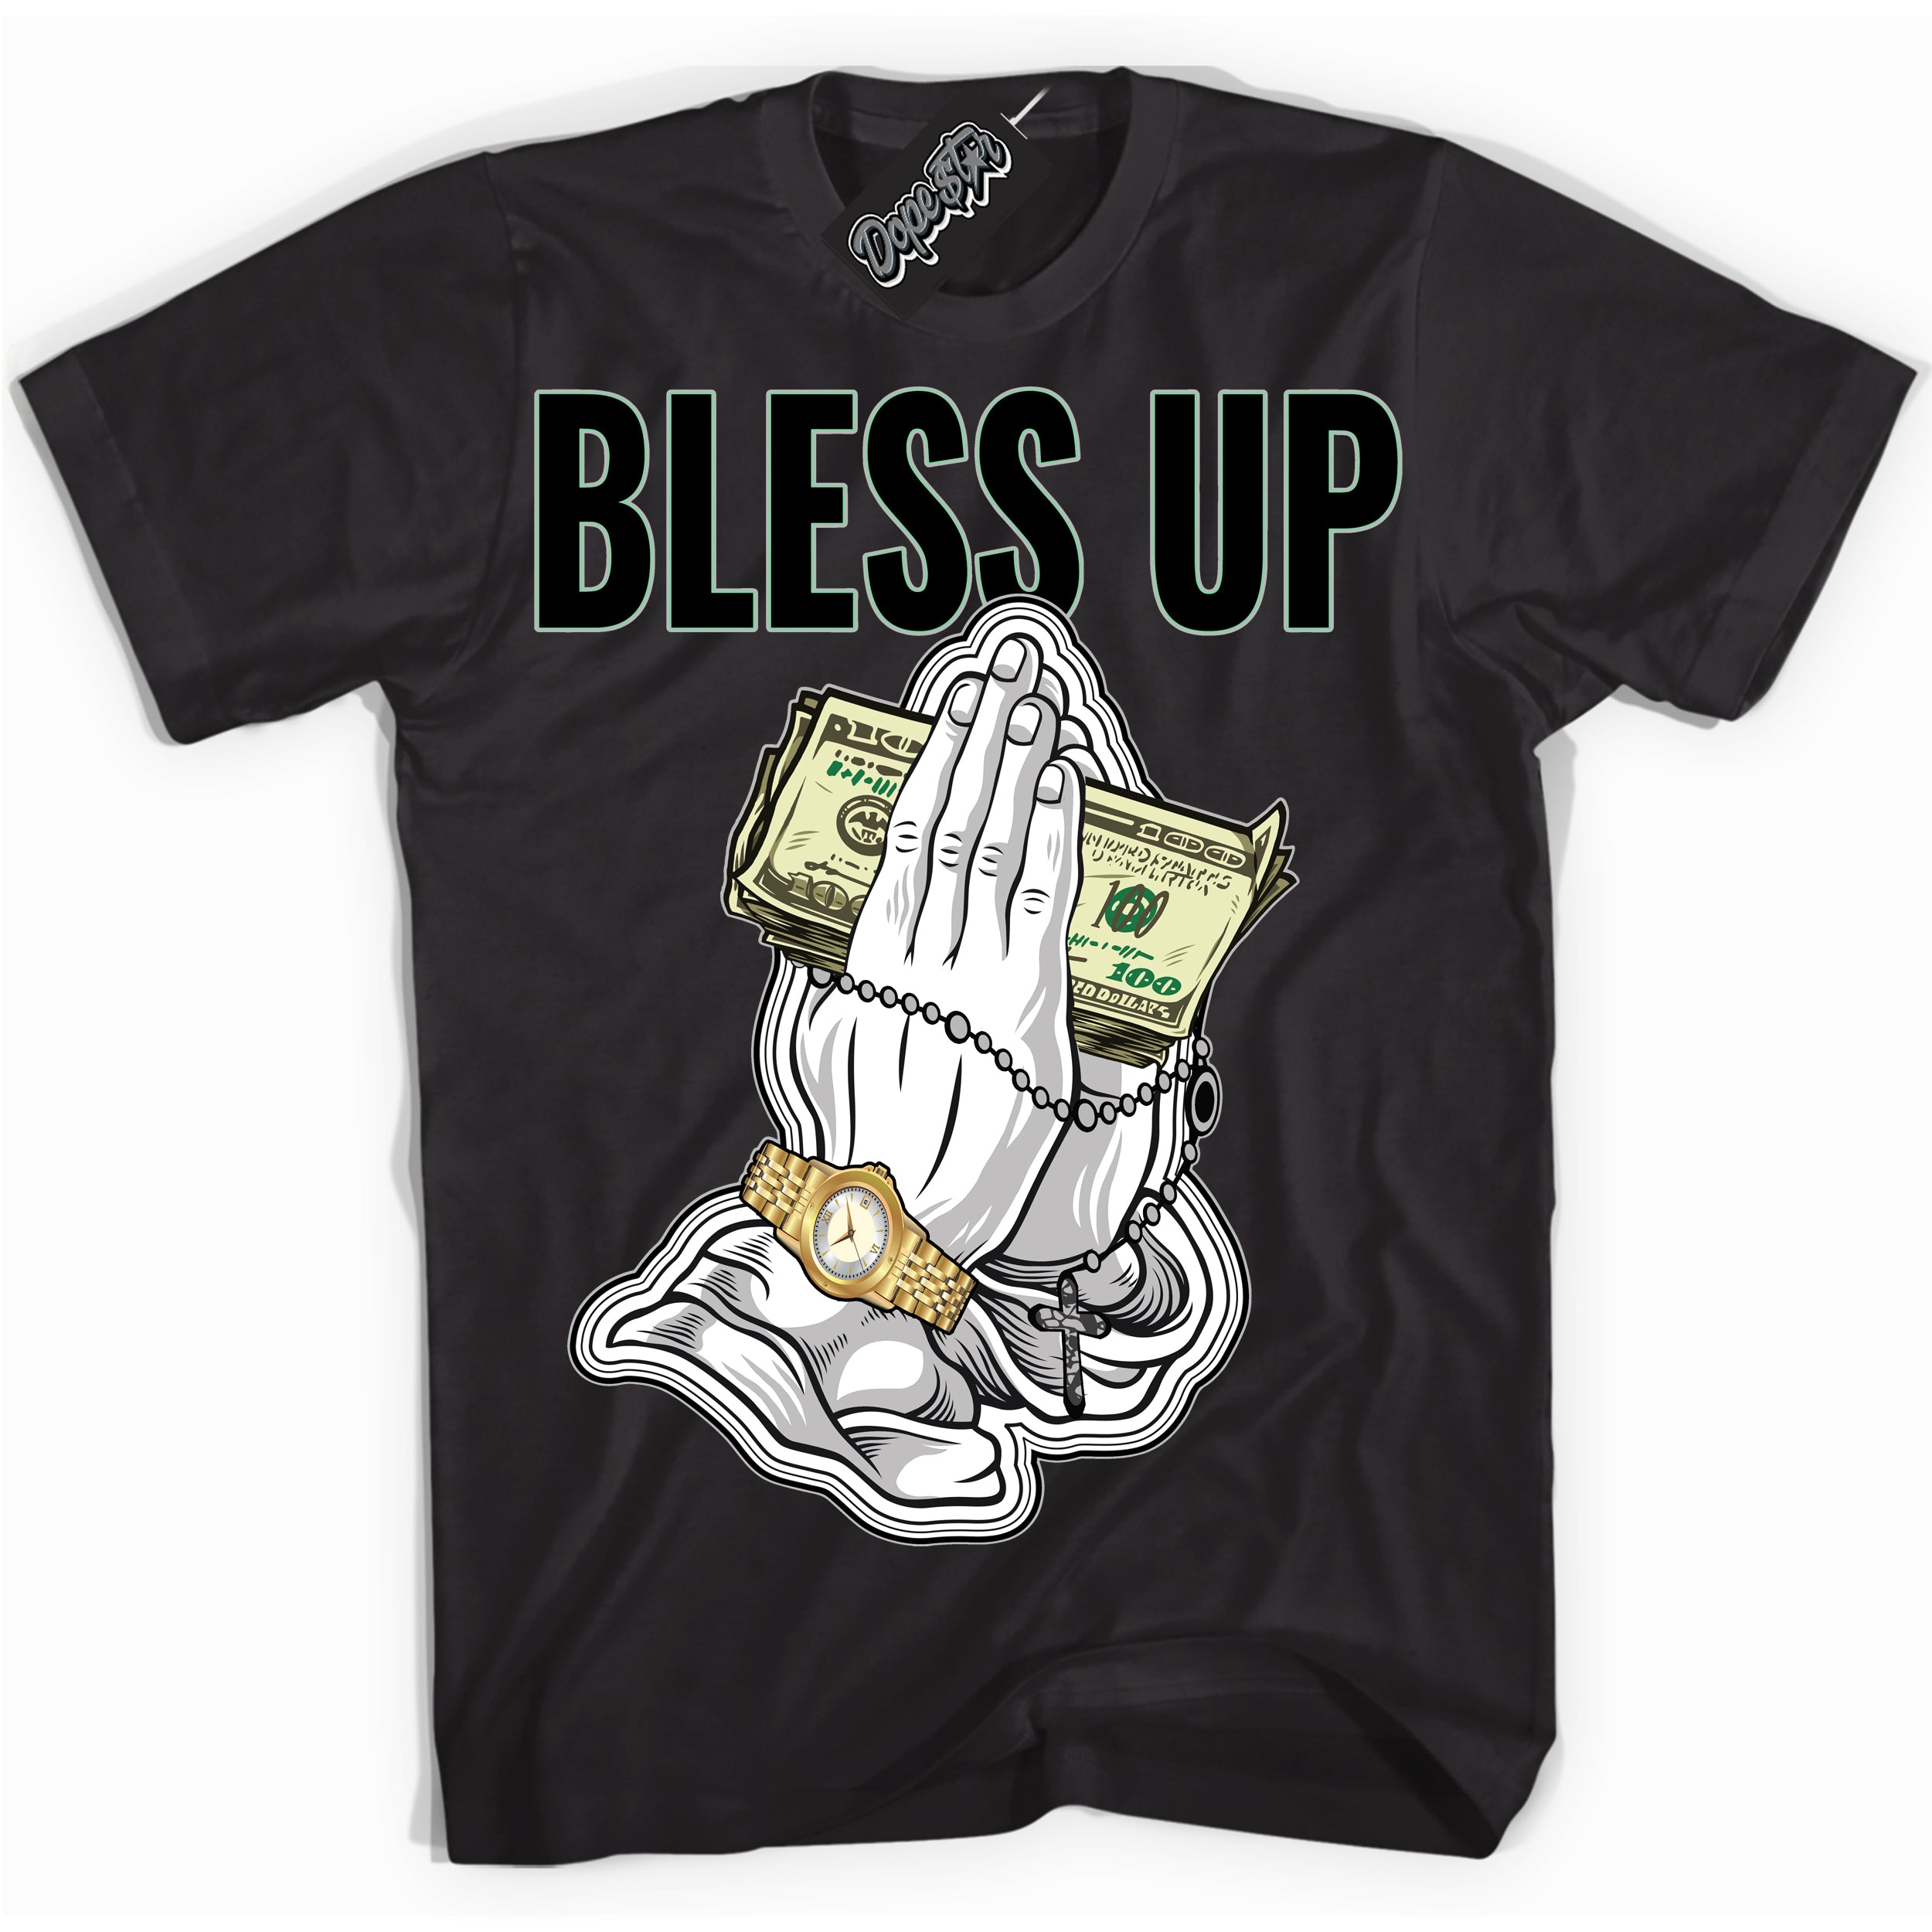 Cool Black graphic tee with “ Bless Up ” design, that perfectly matches Green Glow 3s sneakers 